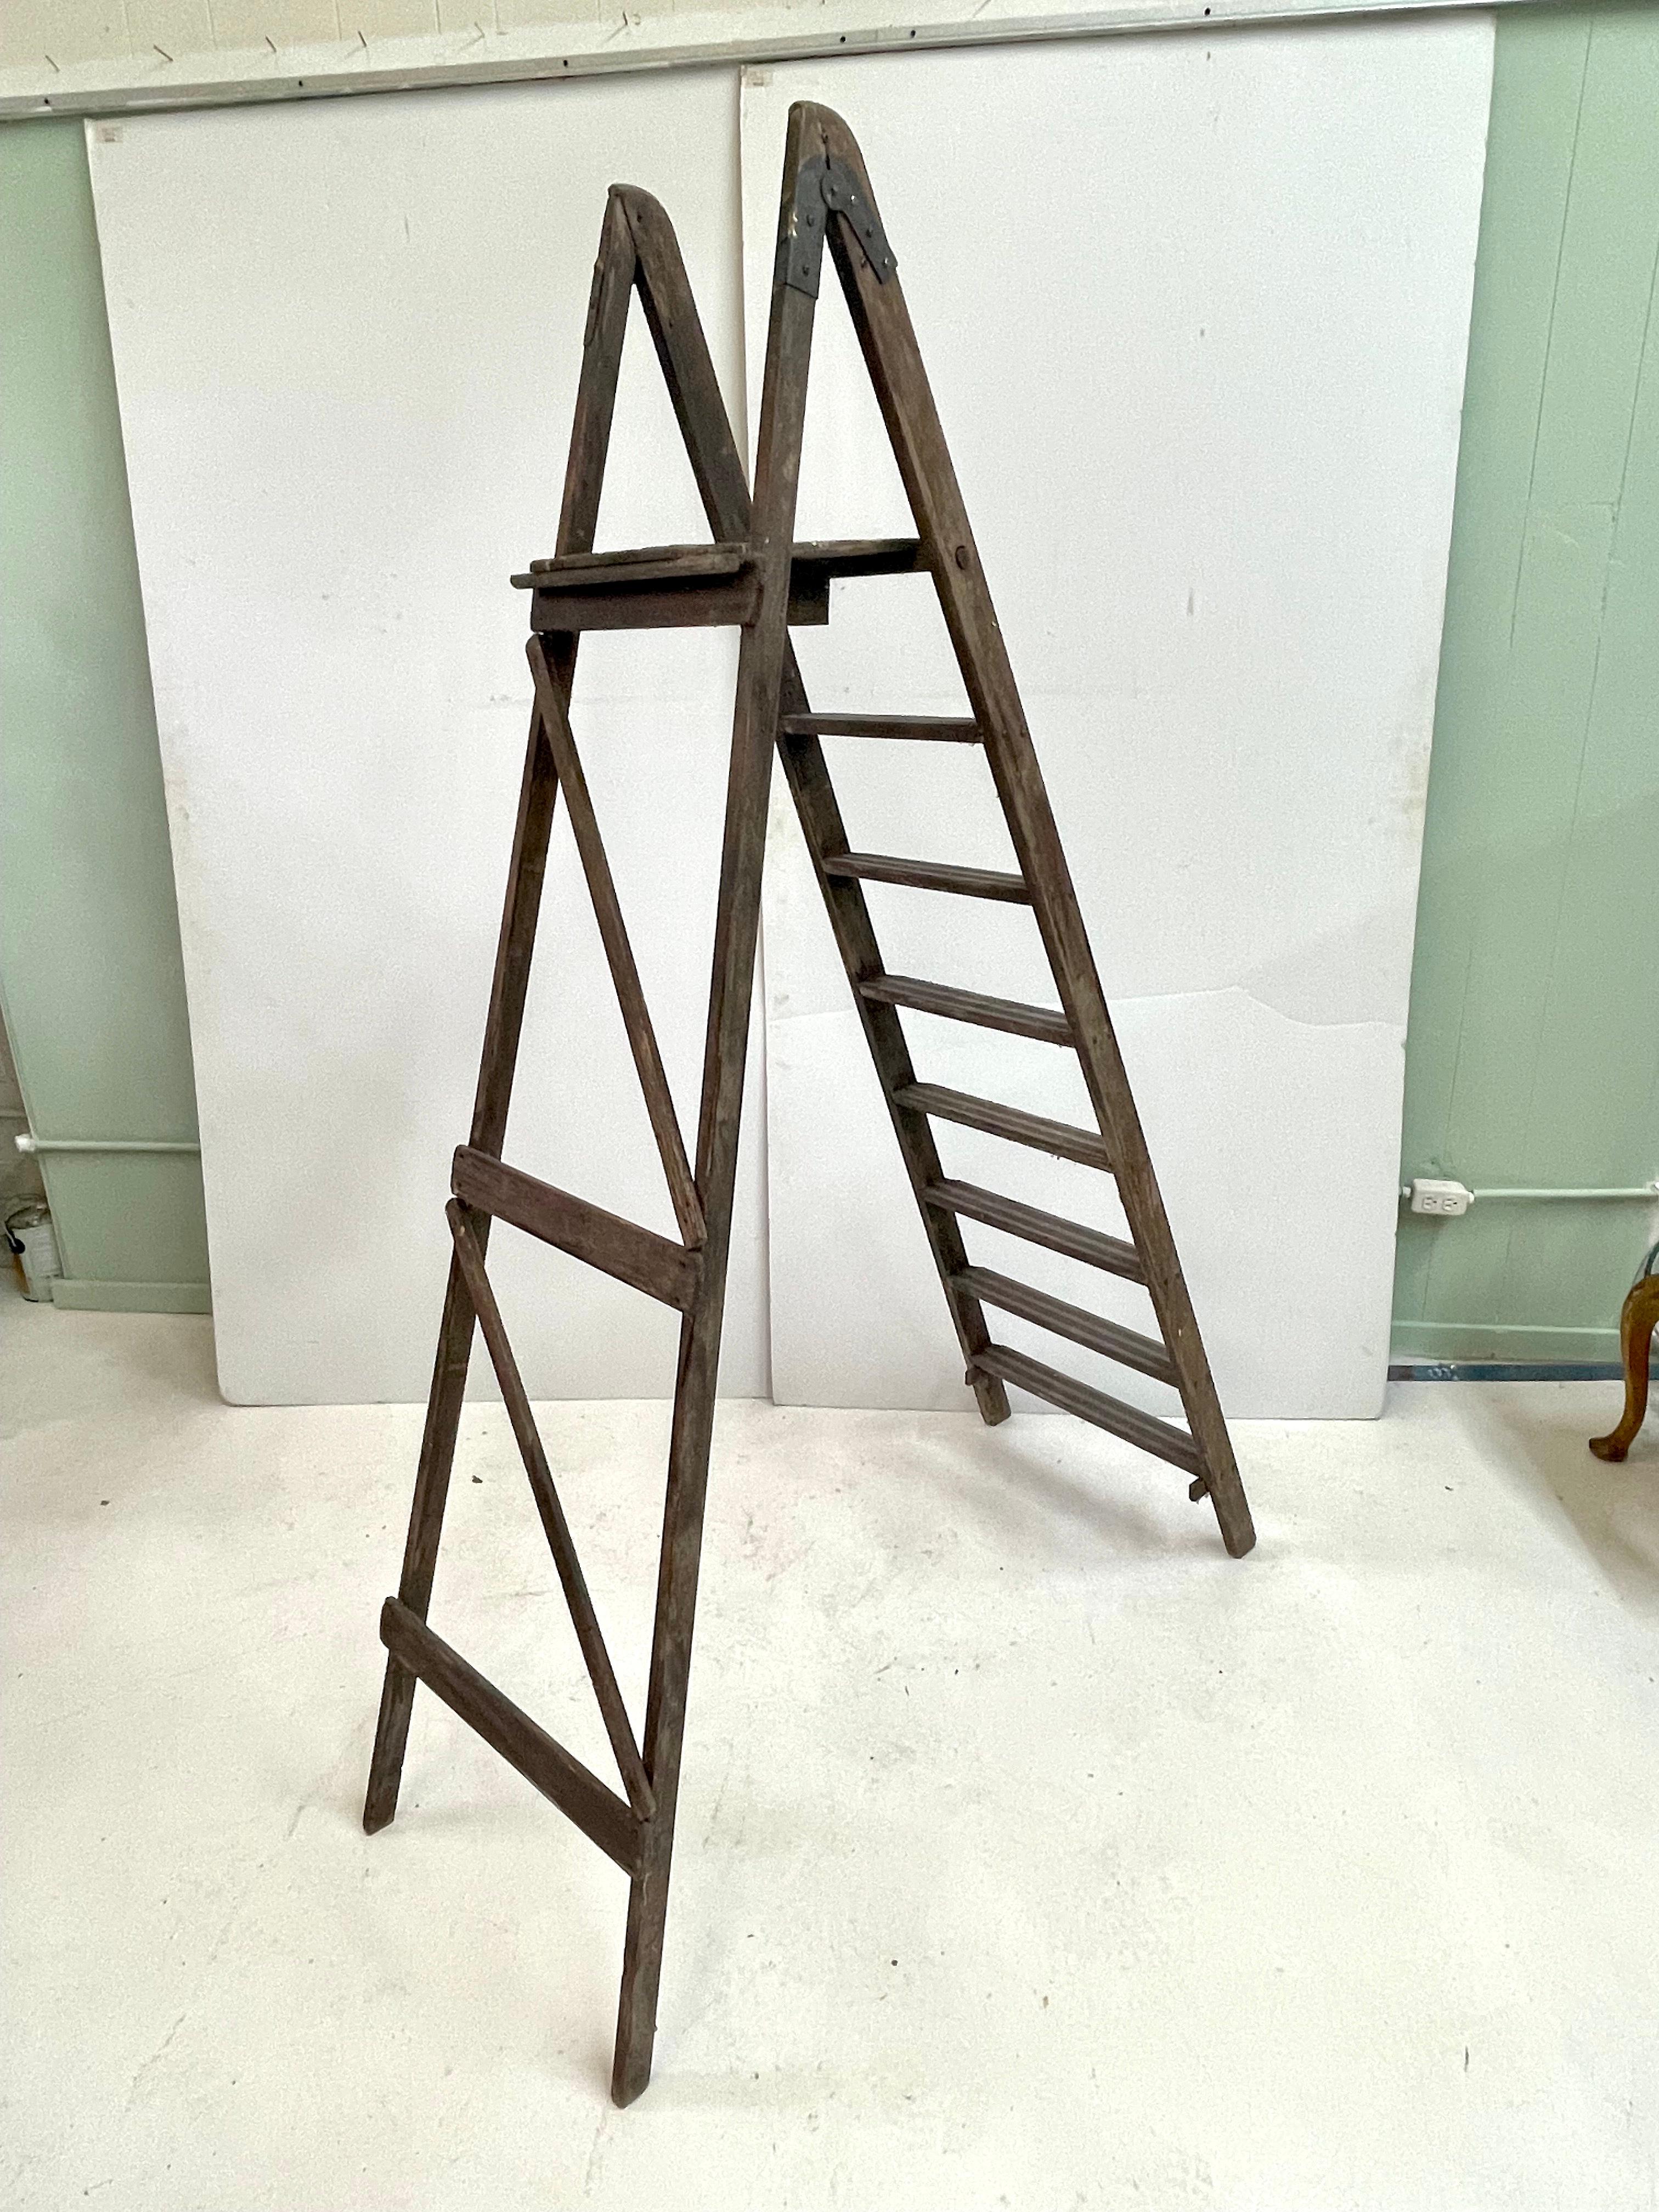 Late Victorian English Antique Wooden Folding Ladder with Tray Shelf For Sale